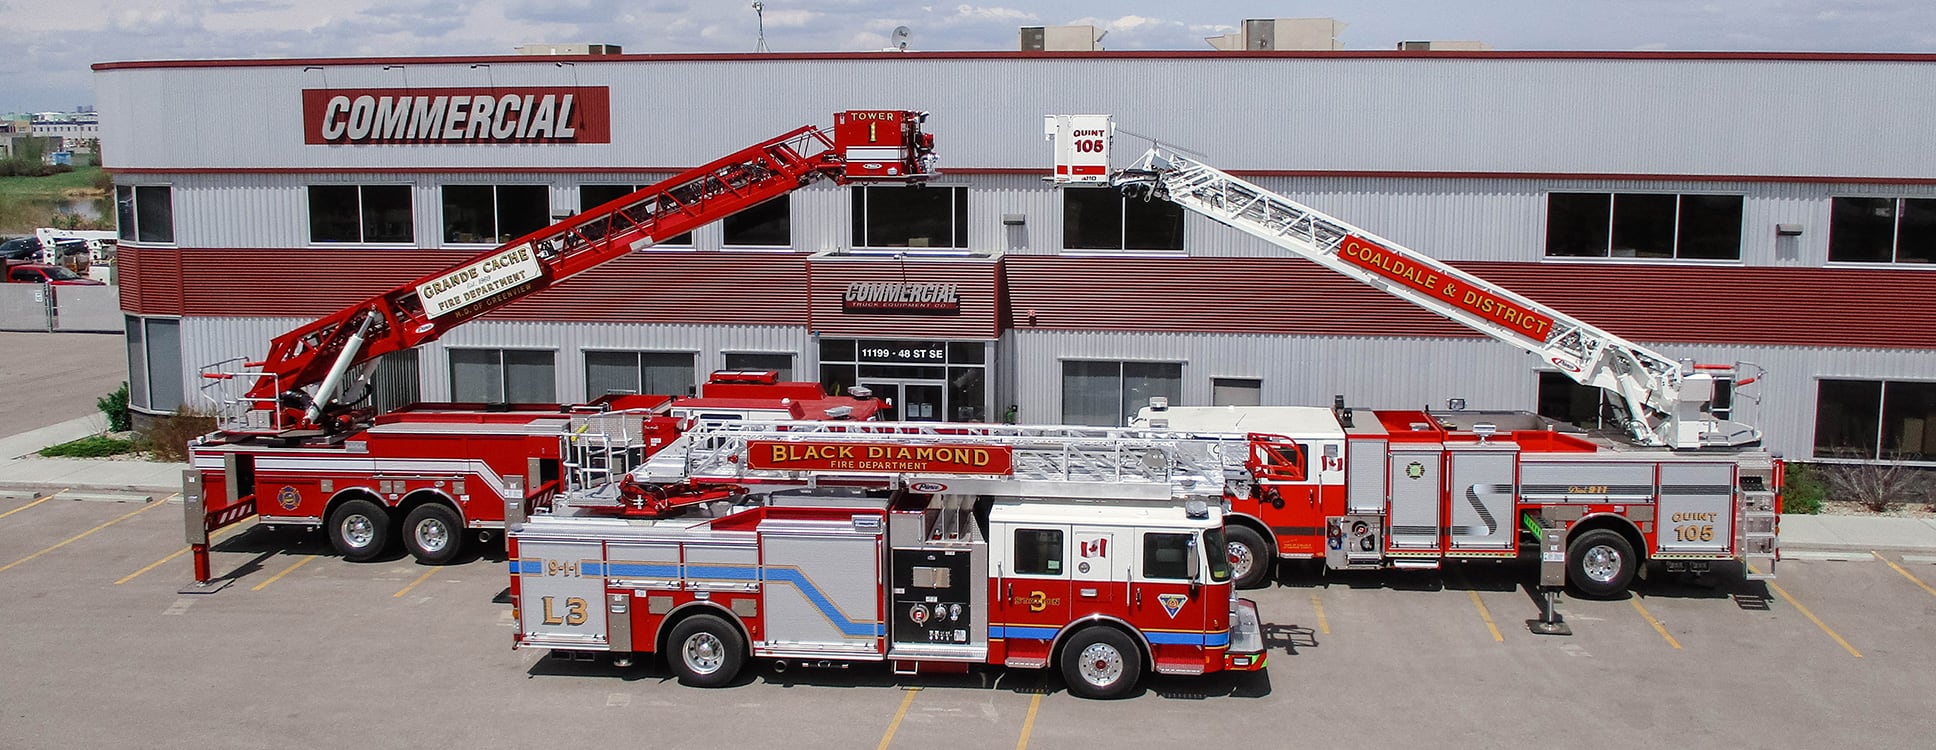 fire trucks parked outside of commercial emergency equipment building